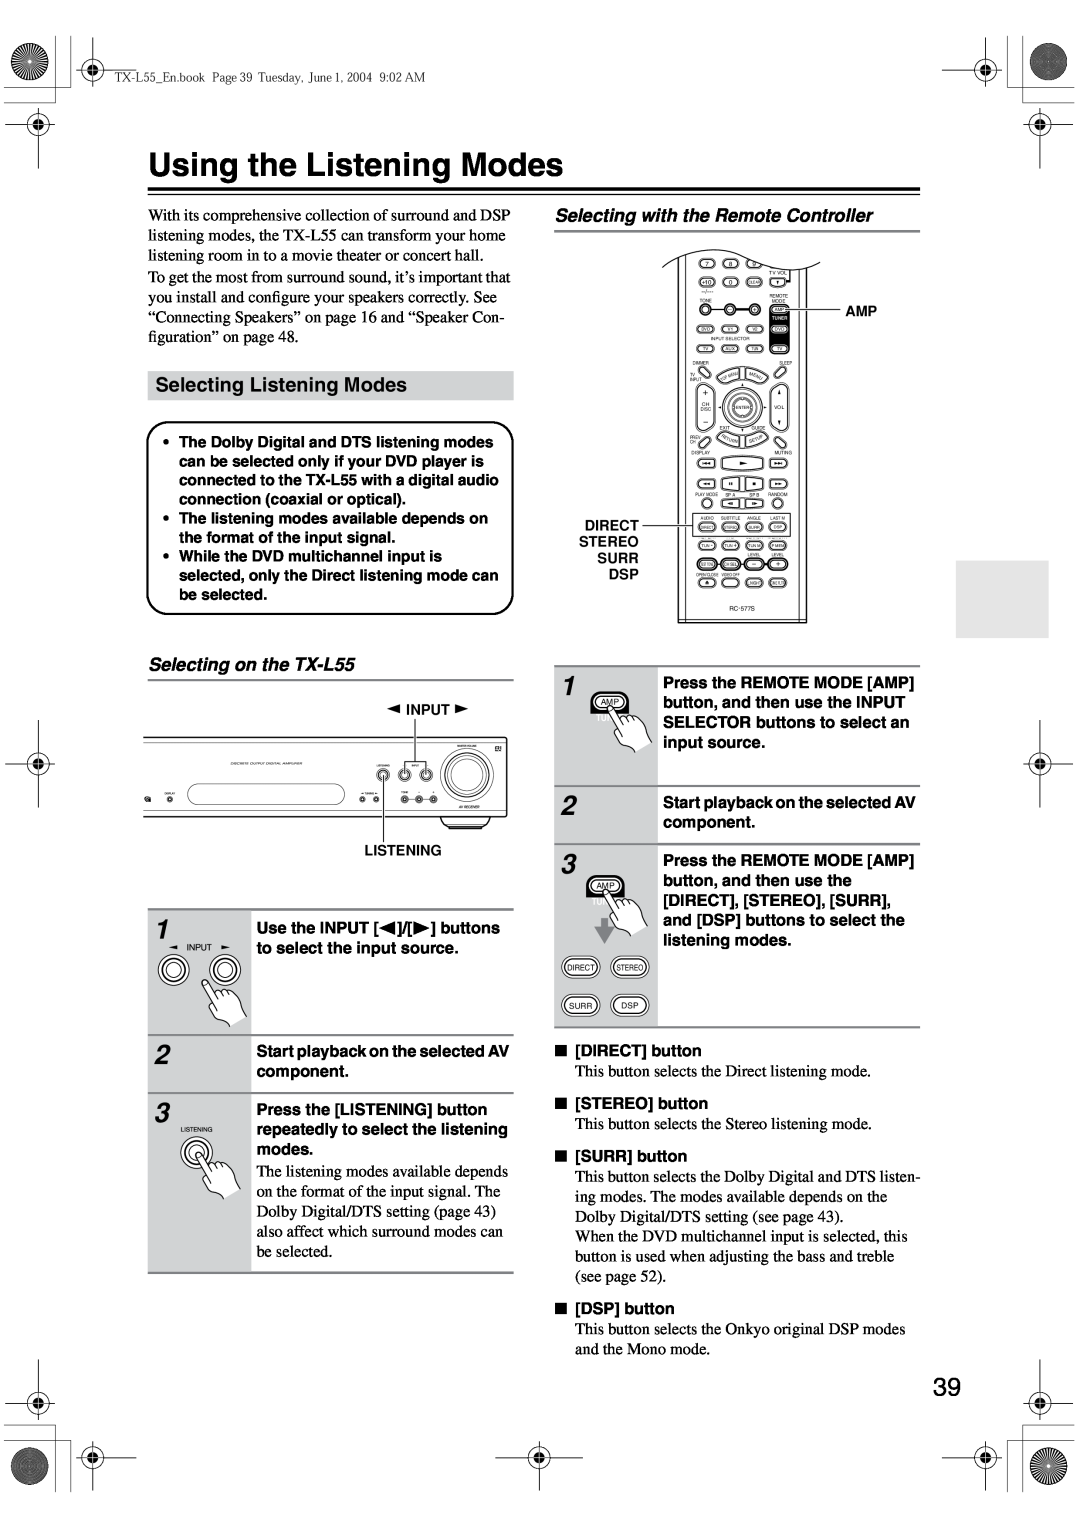 Onkyo TX-L55 instruction manual Using the Listening Modes, Selecting Listening Modes, Selecting with the Remote Controller 